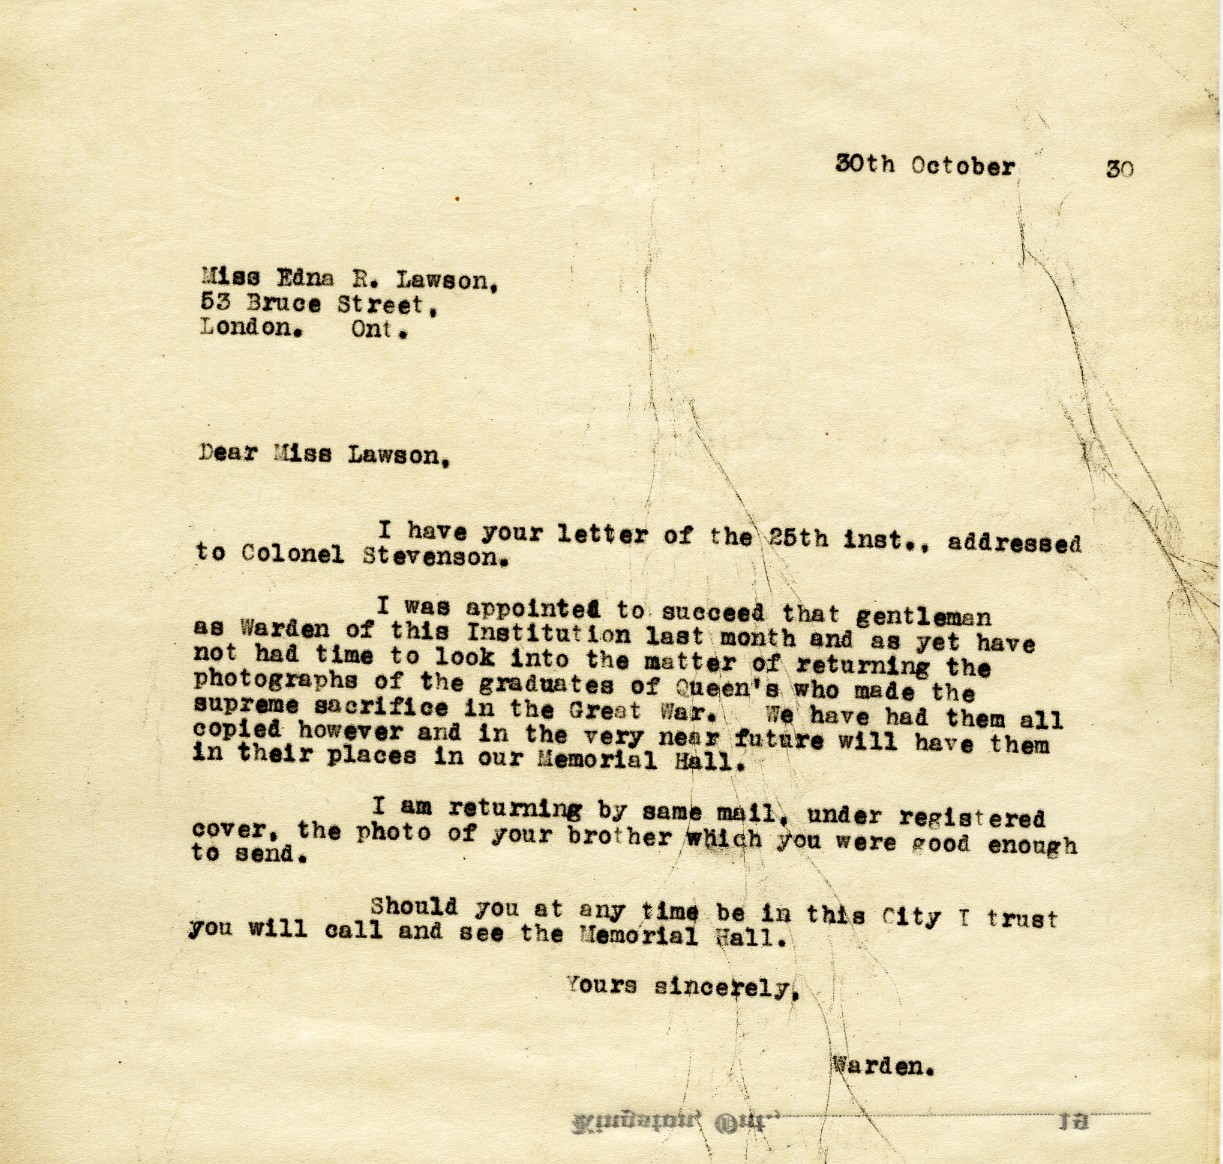 Letter from the Warden to Miss Edna R. Lawson, 30th October 1930